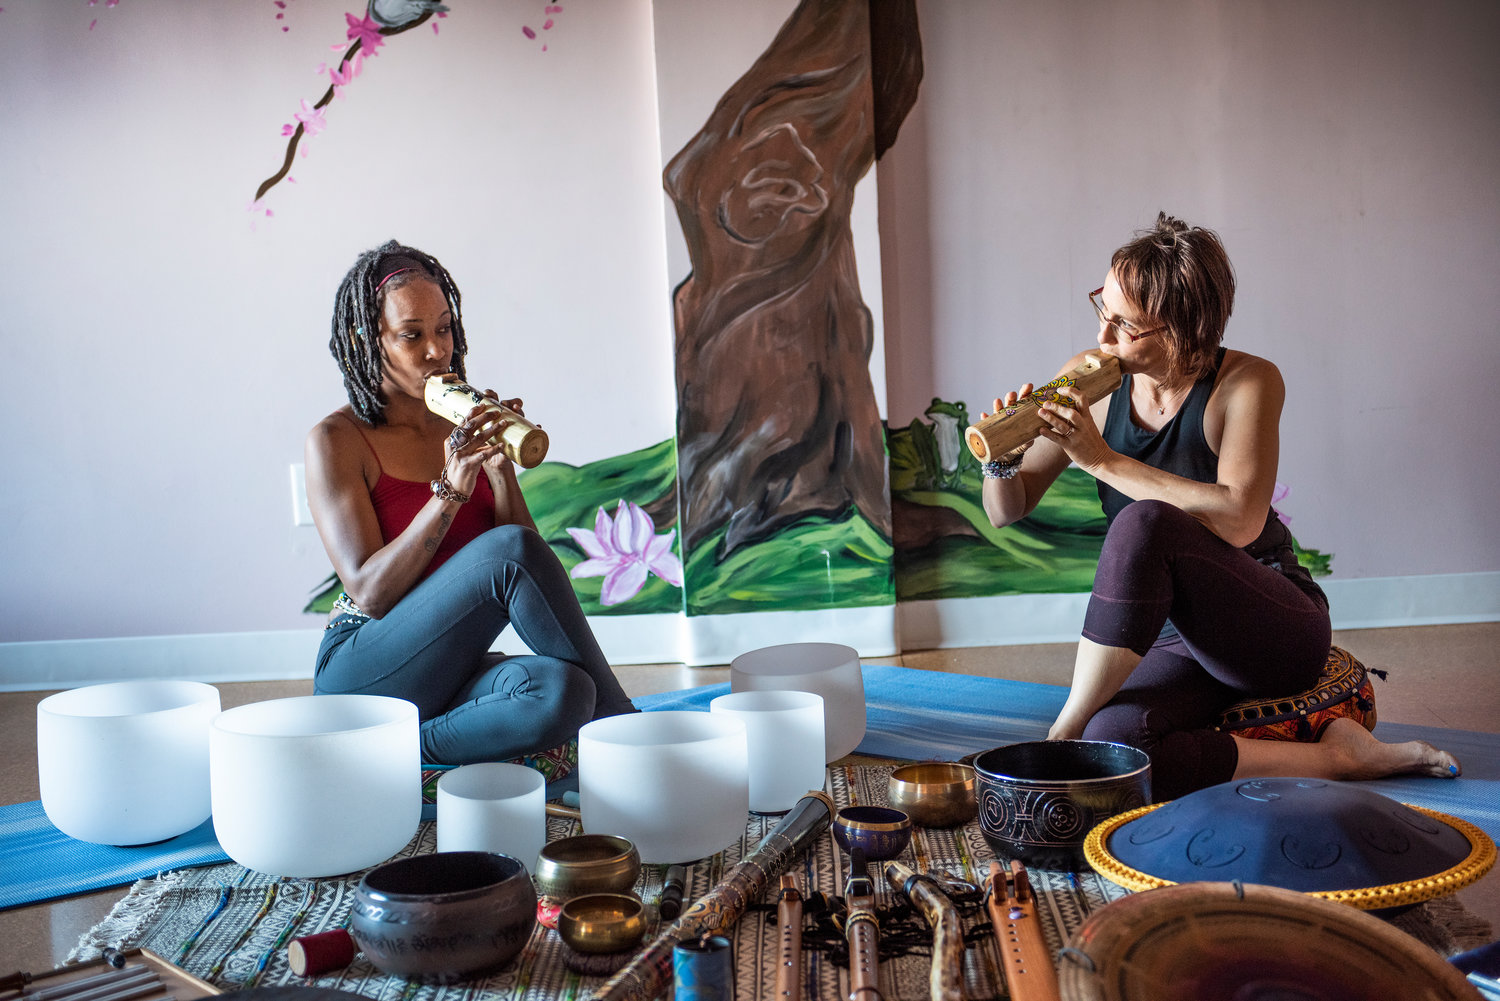 Kalei Phree and Courtney Faiello play the flute during a private Sound Bath at Living Balance Studios.